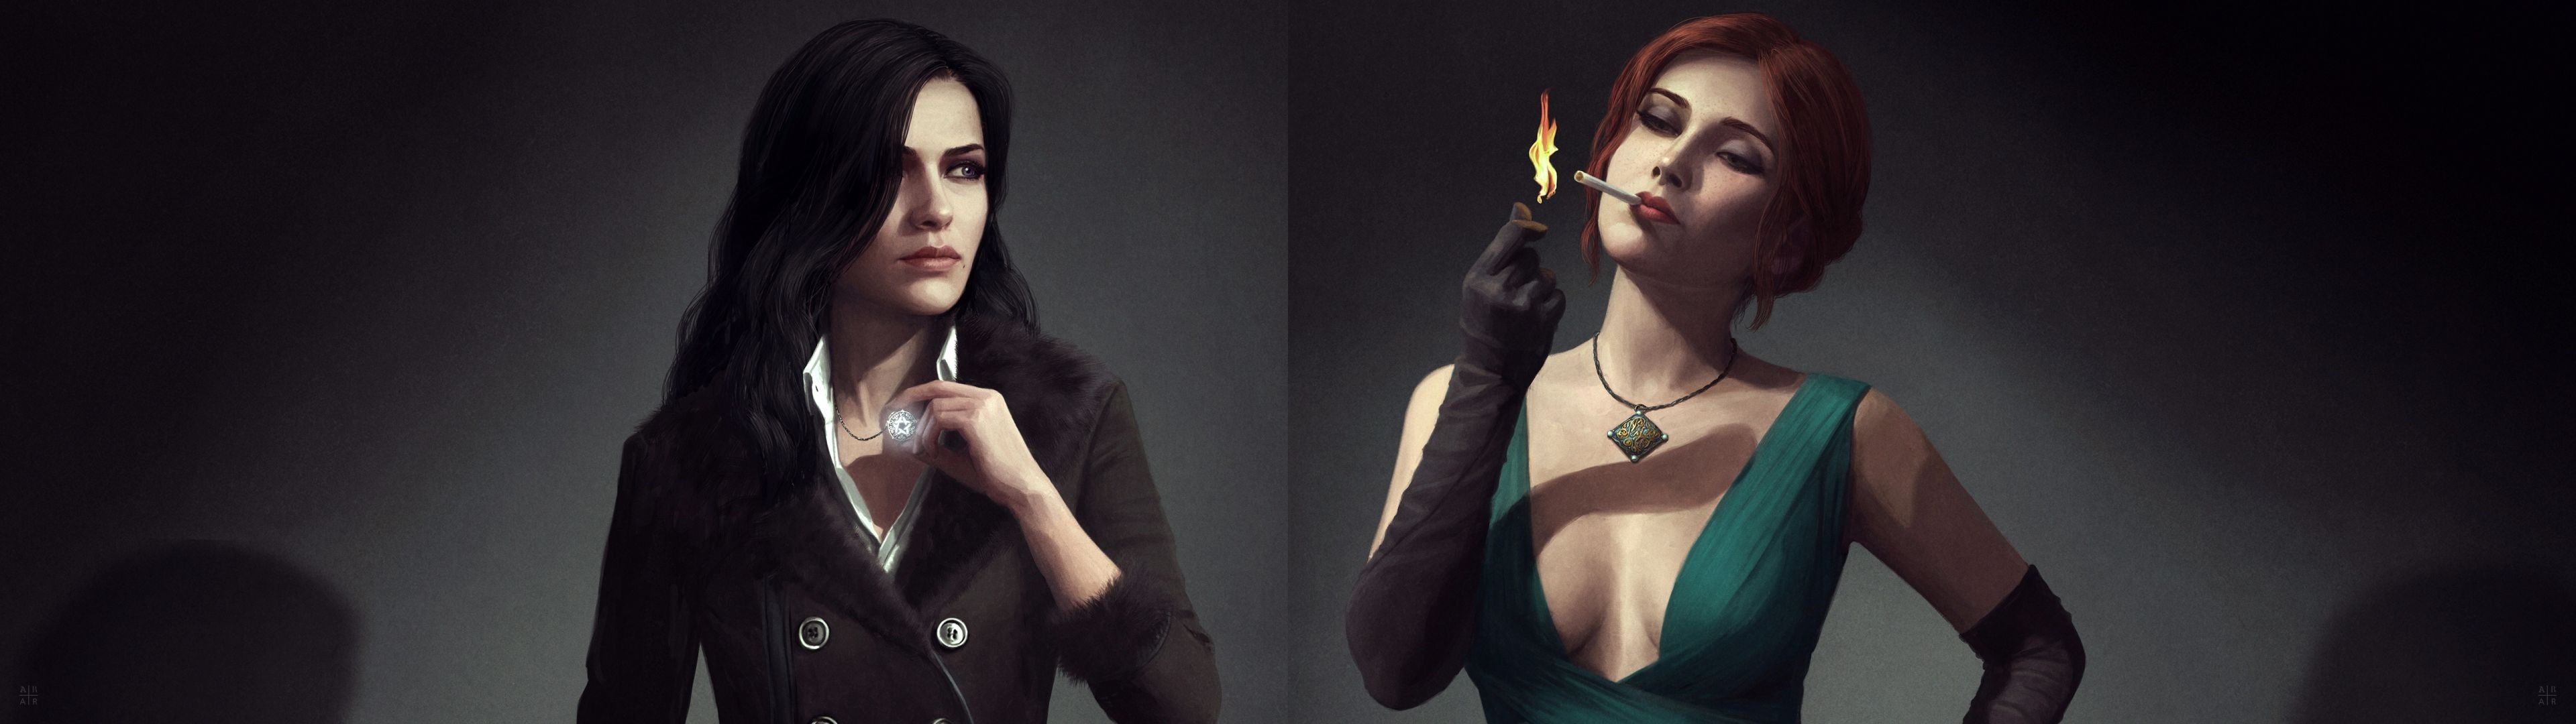 Triss Merigold, Video game characters, The Witcher, The Witcher 3: Wild Hunt, Yennefer of Vengerberg Wallpaper